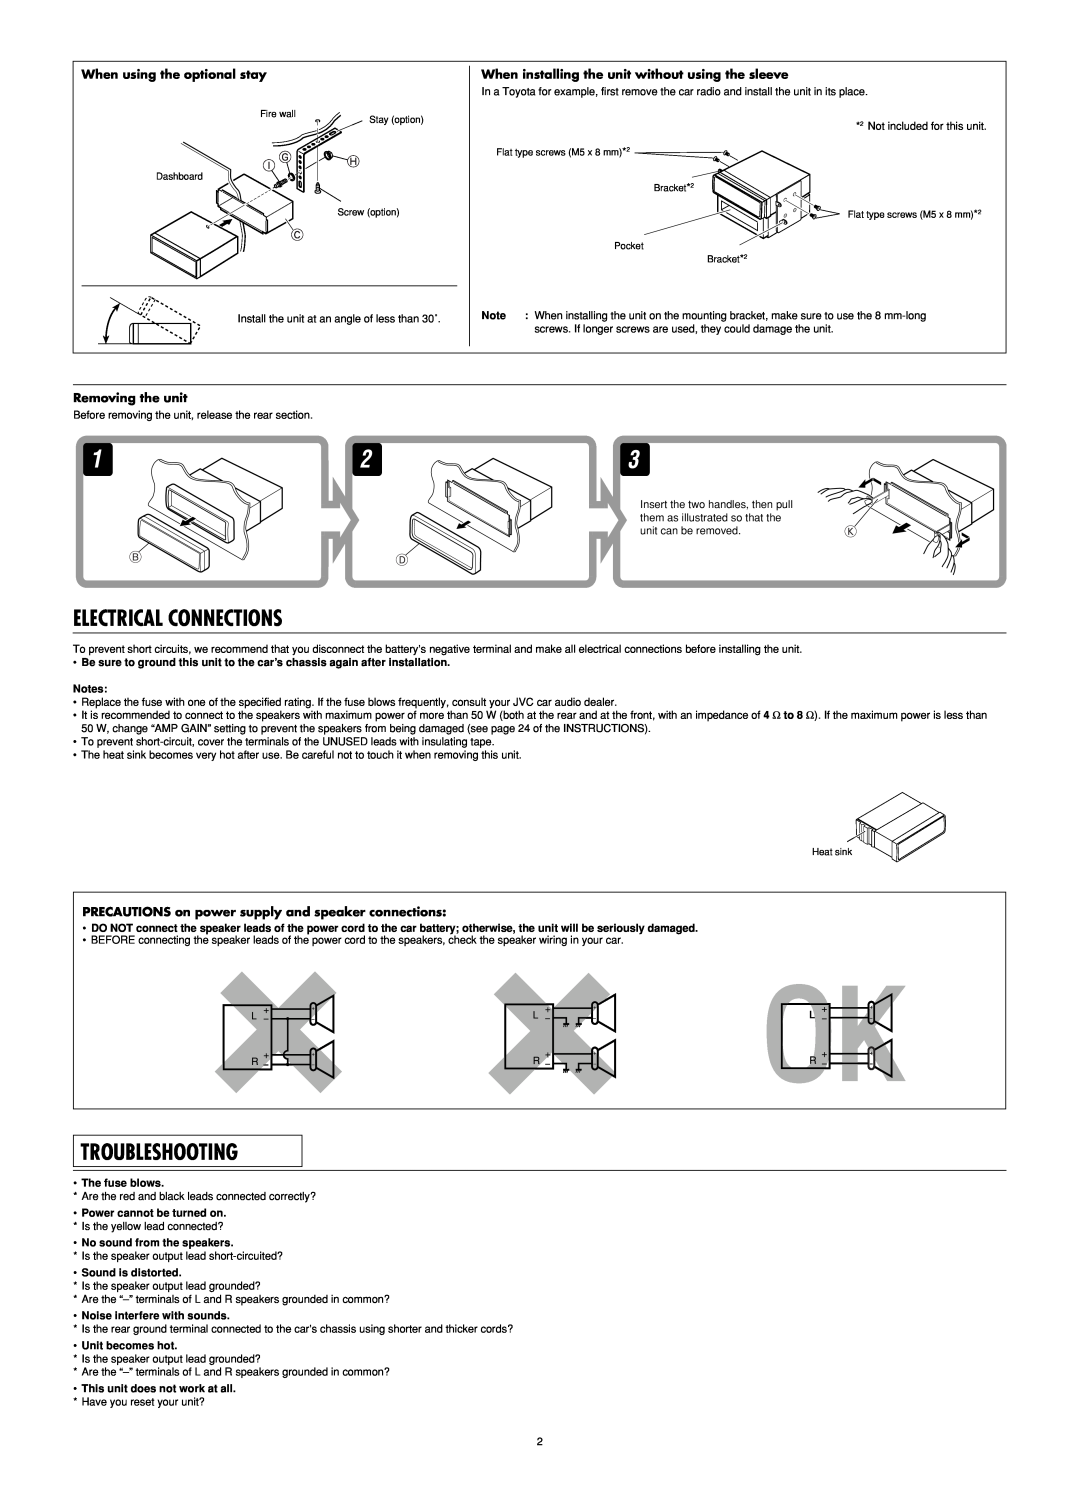 JVC KD-SV3104 manual Electrical Connections, Troubleshooting, When using the optional stay, Removing the unit 